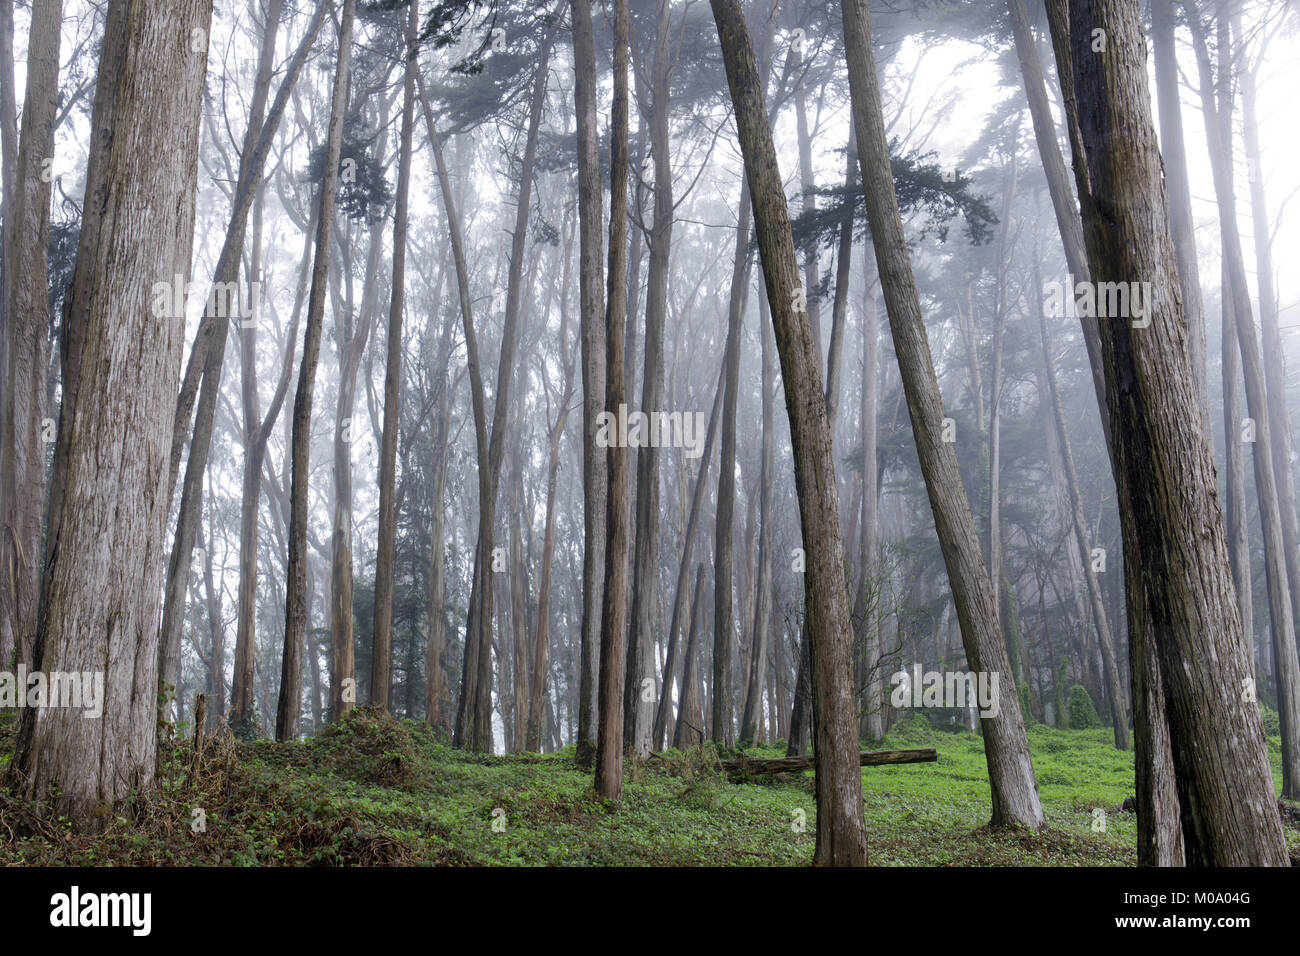 Monterey Cypress Forest In The Fog. Stock Photo